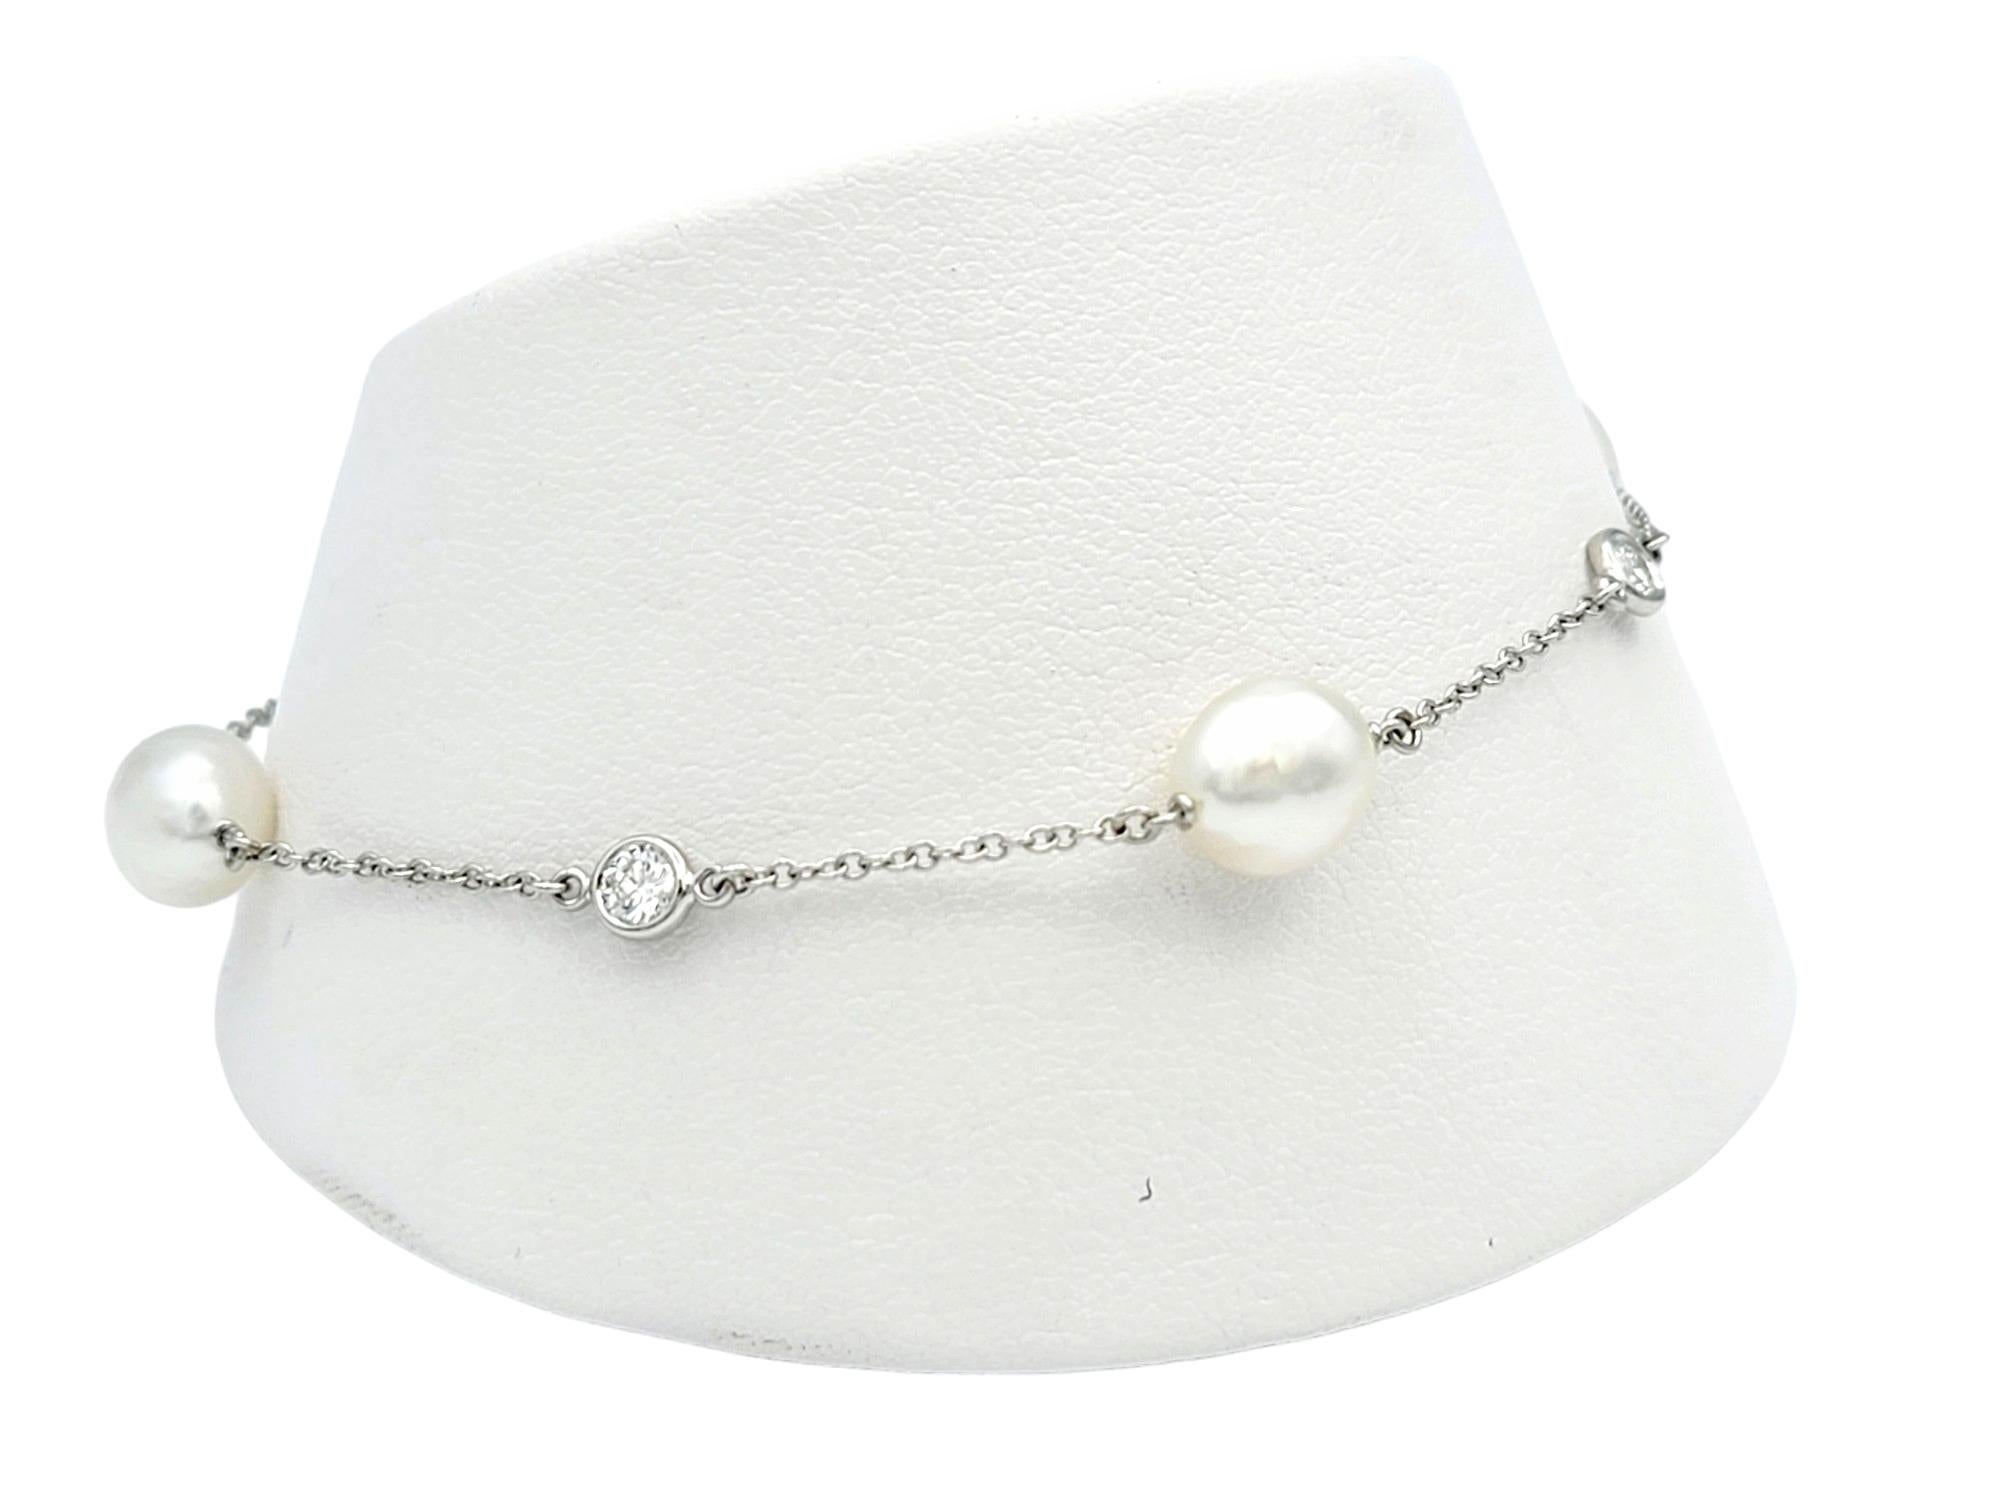 Contemporary Tiffany & Co. Elsa Peretti Diamonds by the Yard Chain Bracelet with Keshi Pearls For Sale